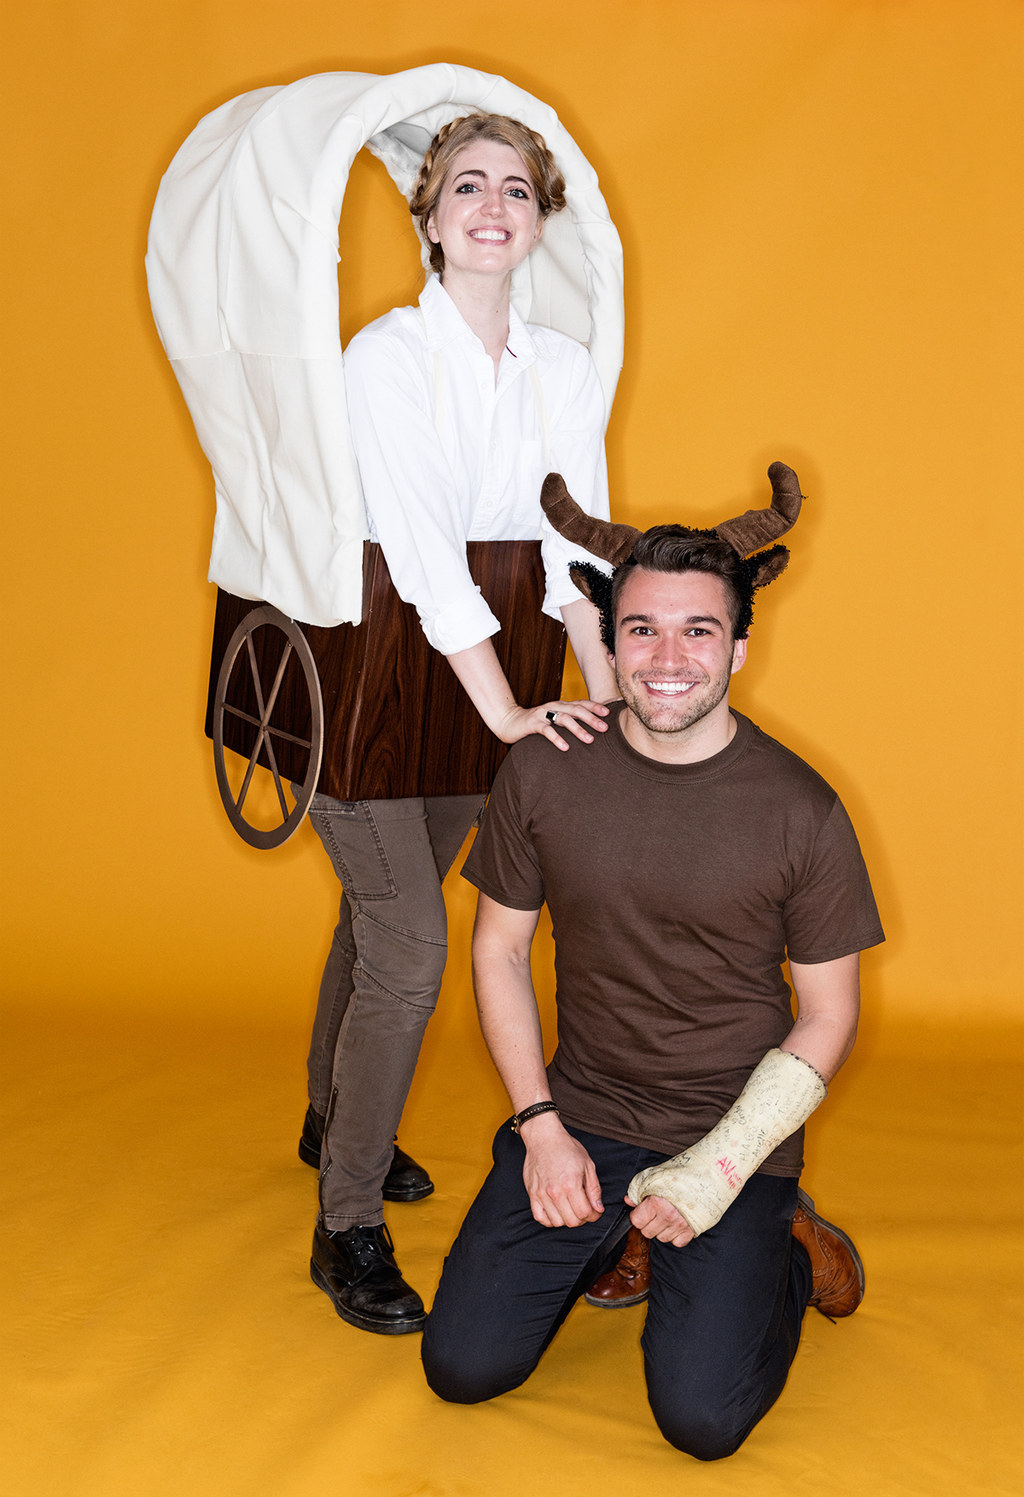 One person dressed like a wagon and one person wearing ox ears